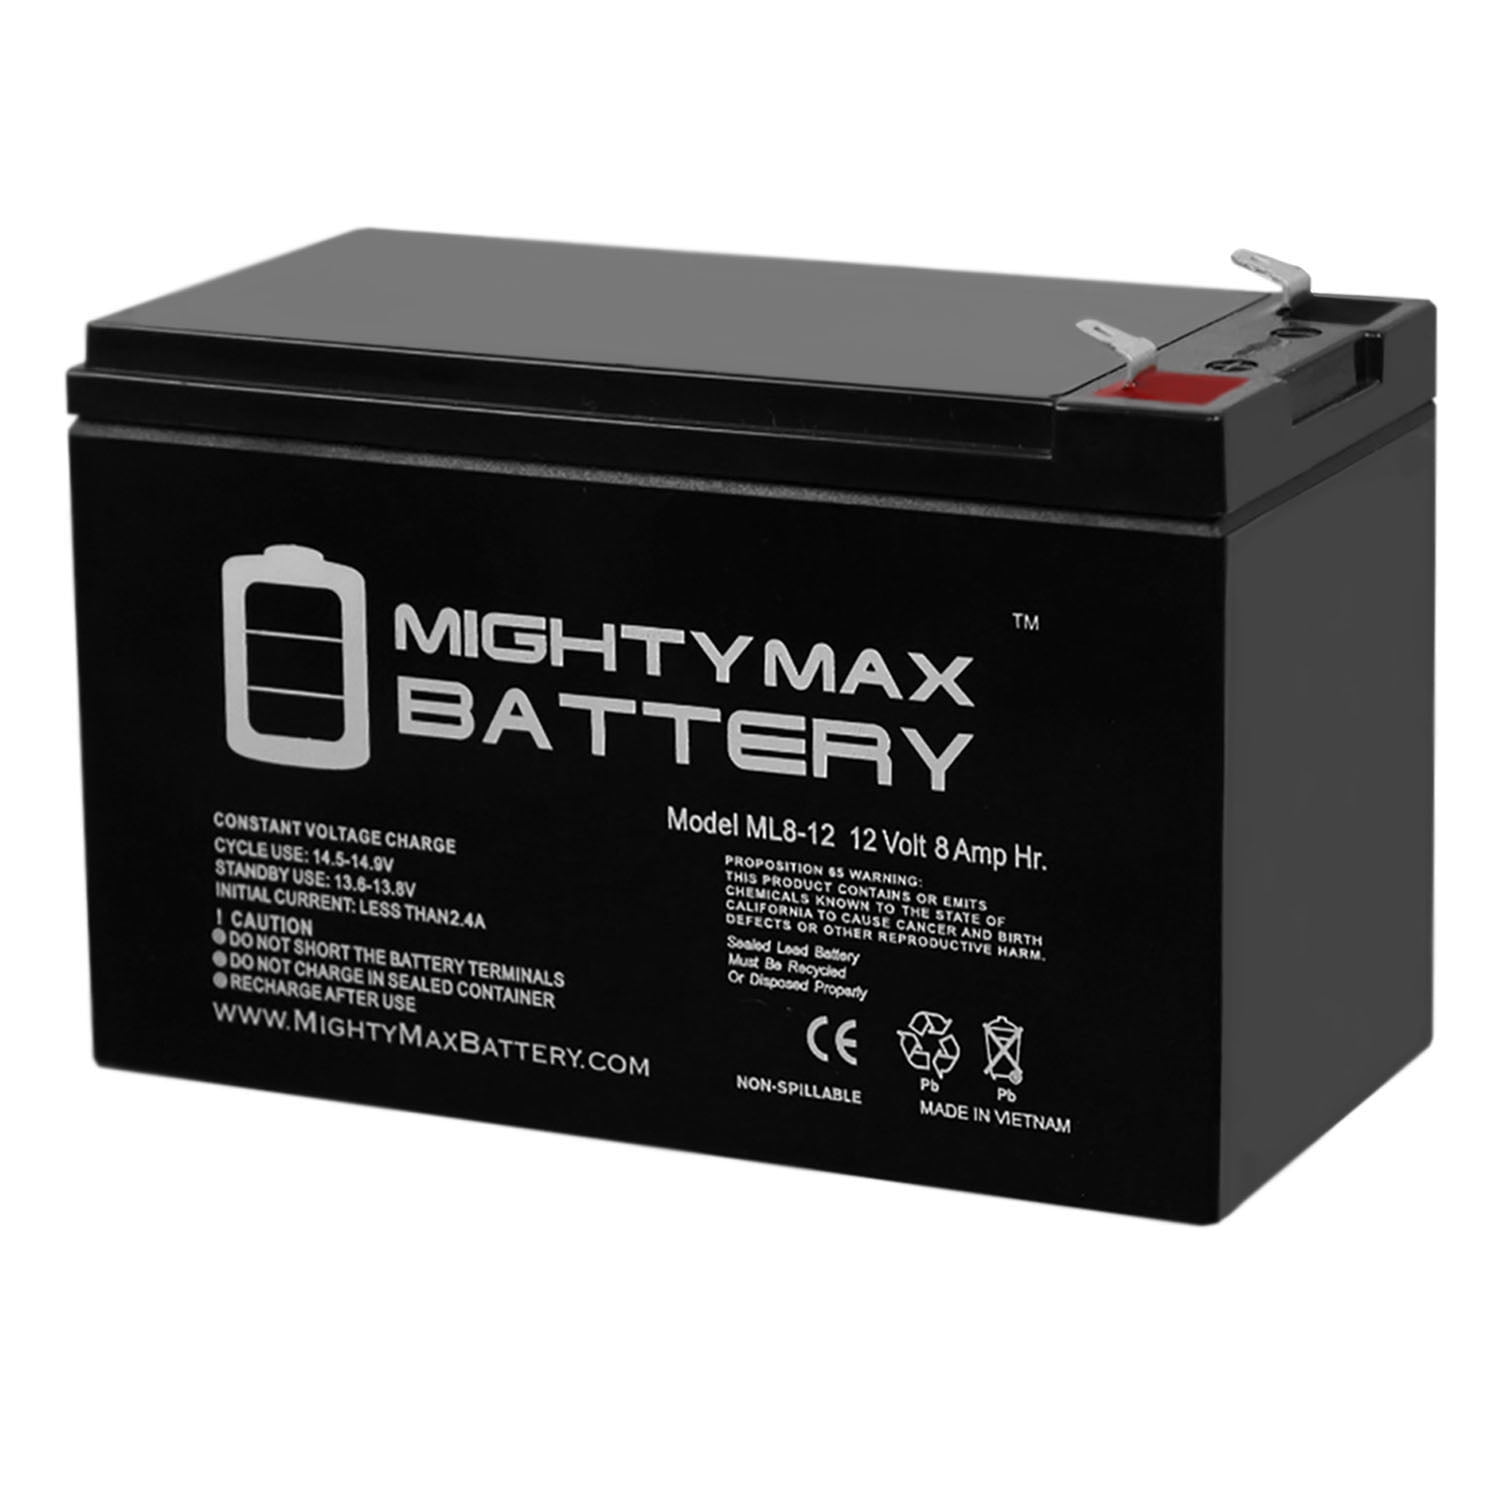 Mighty Max Battery 12V 8Ah SLA Battery for Liftmaster CSW24V Swing Gate Opener 2 Pack Brand Product 